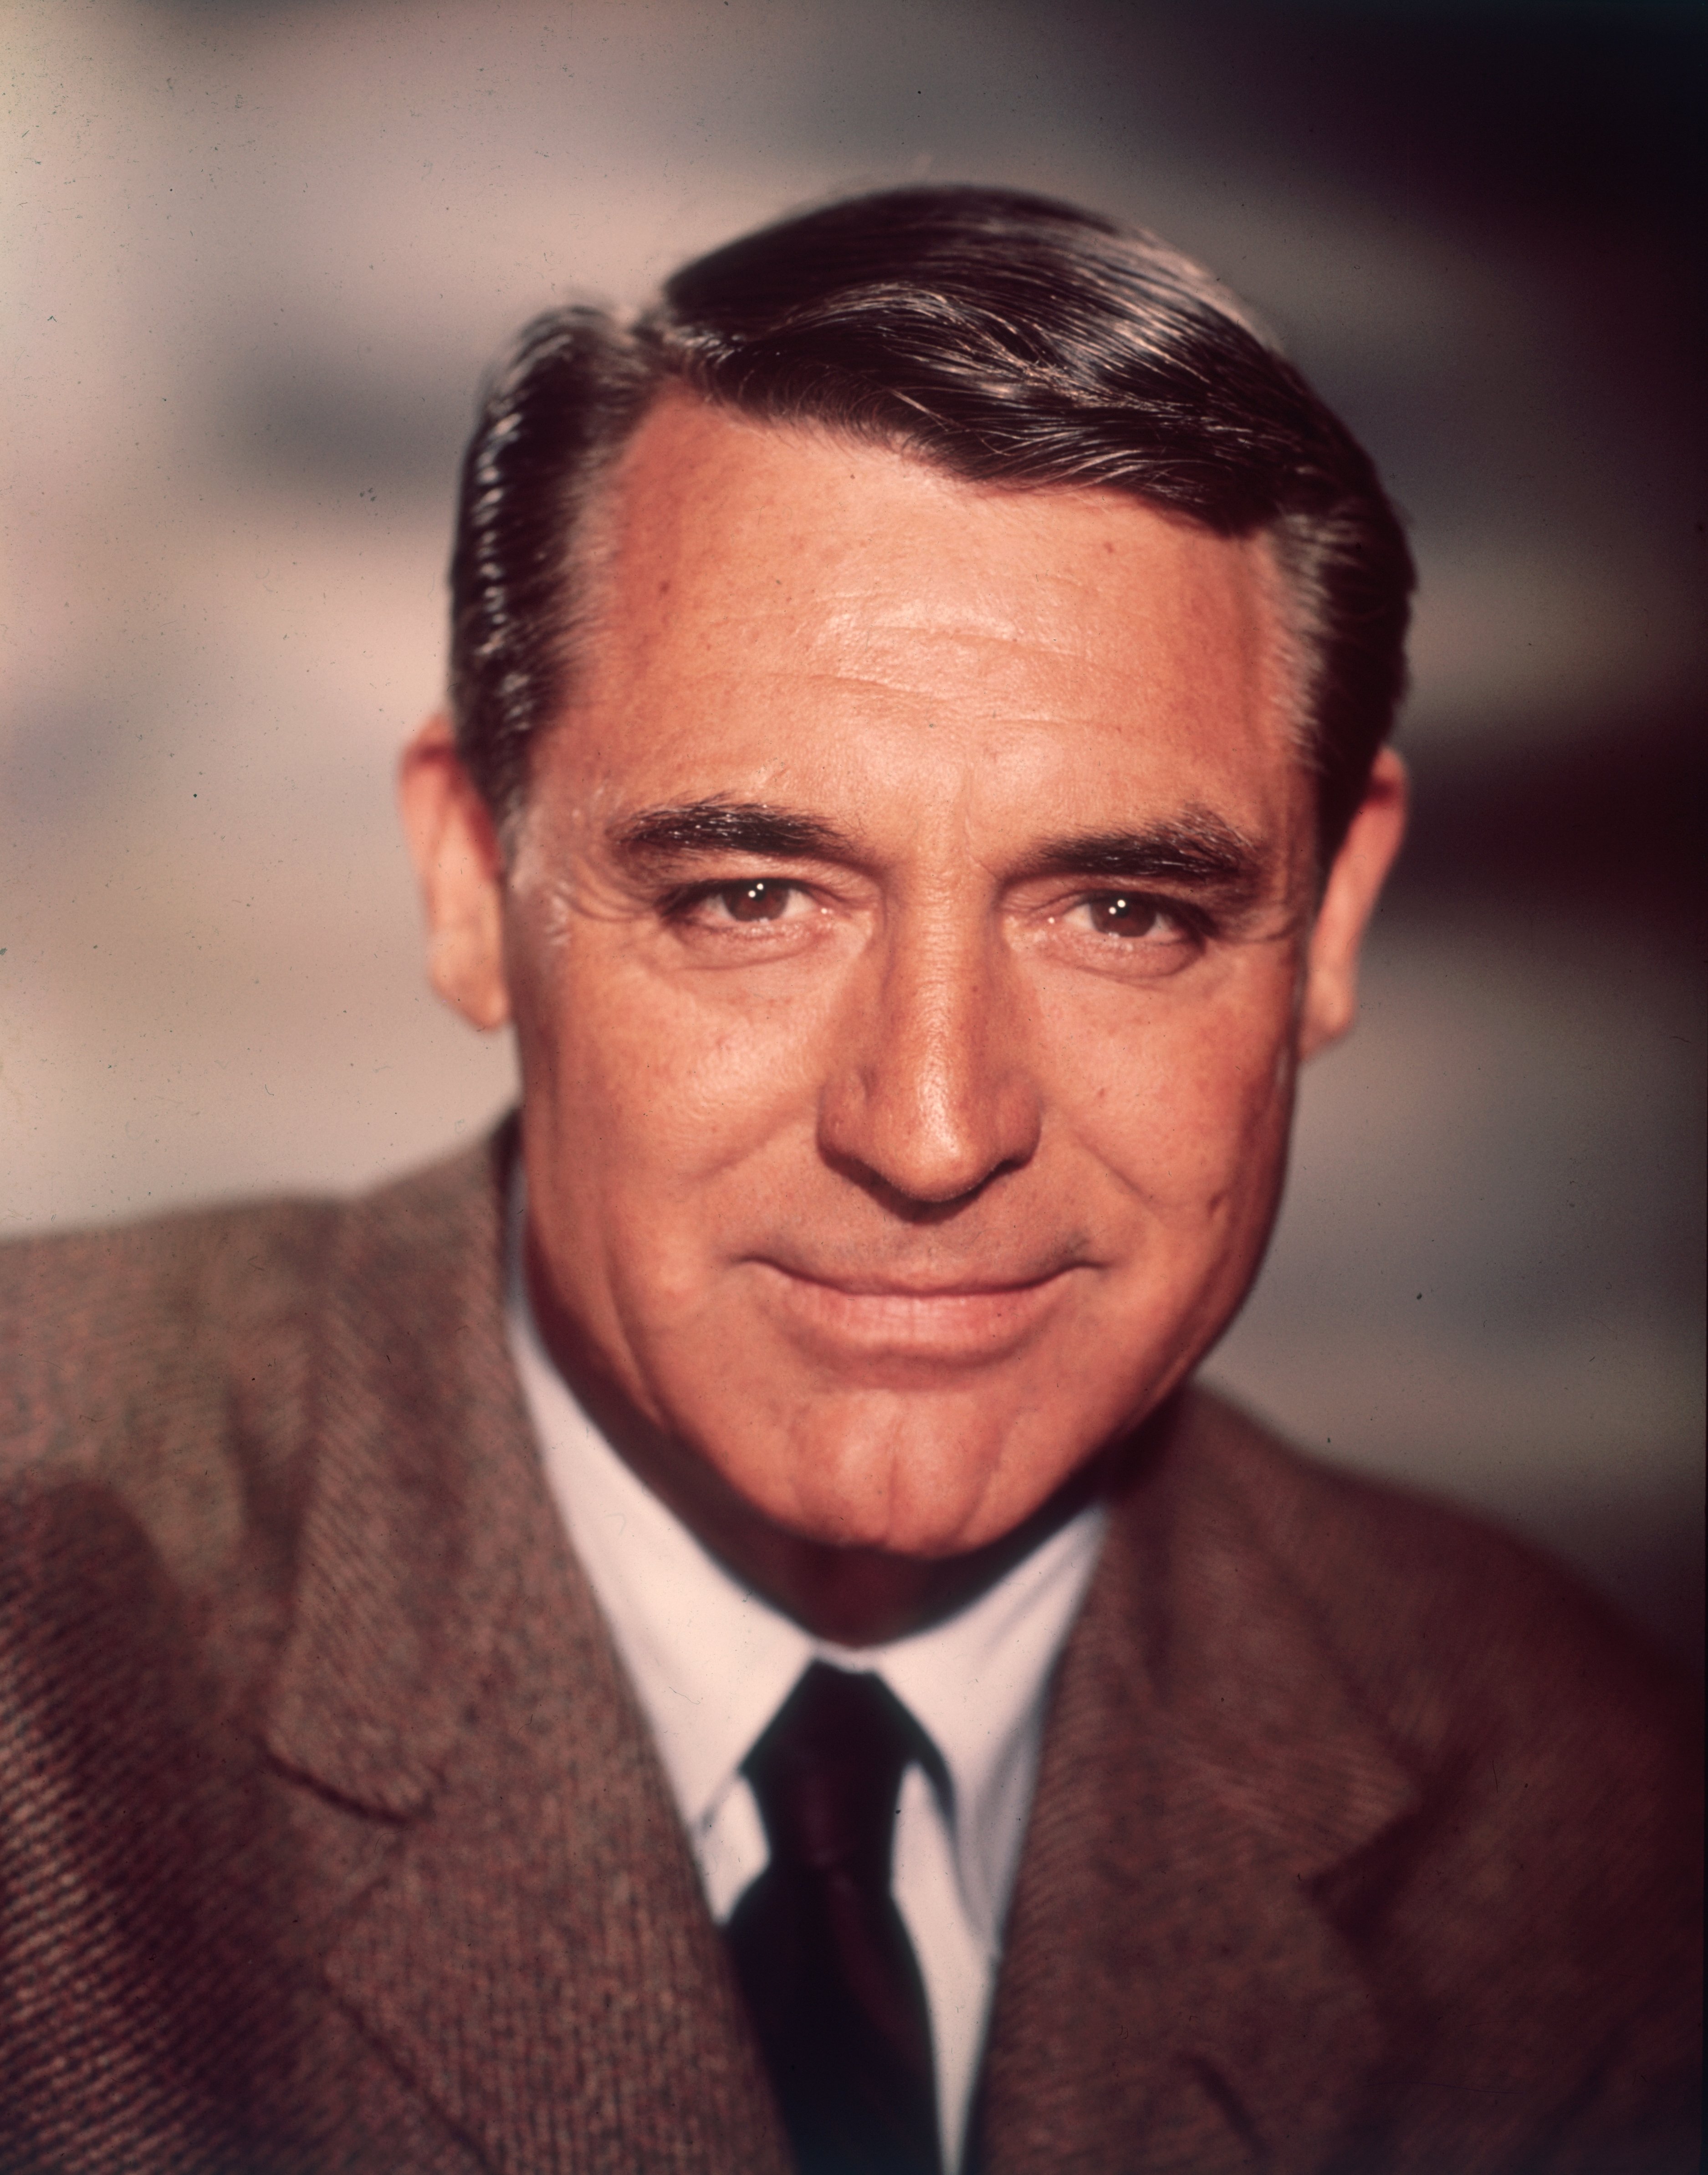 An undated image of American actor Cary Grant who starred in Hitchcock films | Photo: Getty Images